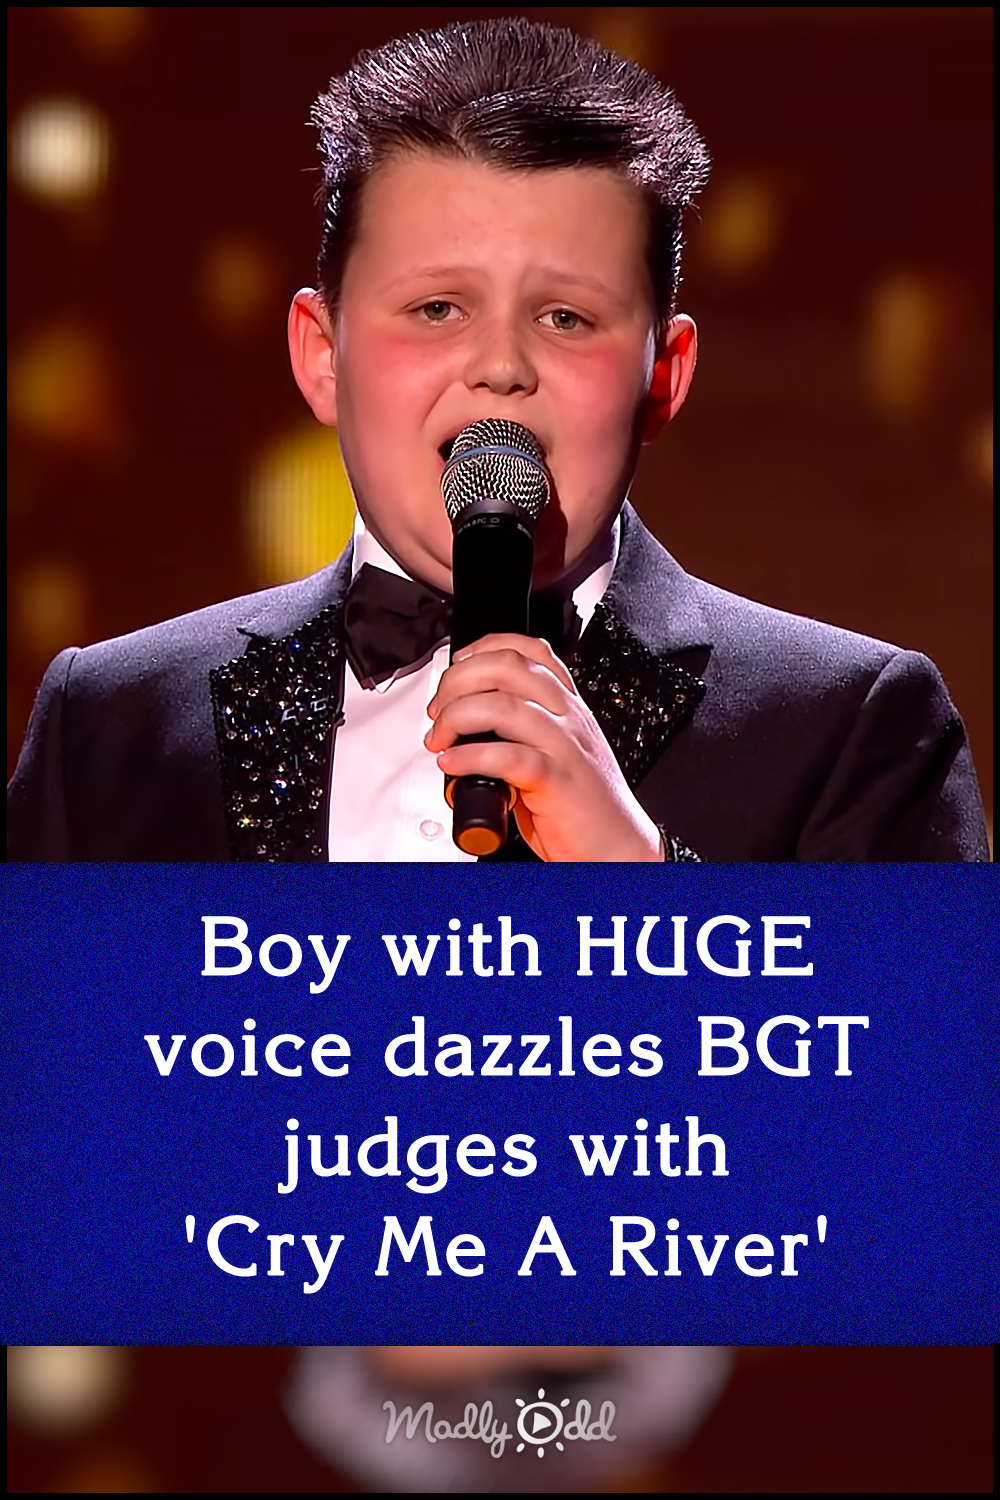 Boy with HUGE voice dazzles BGT judges with \'Cry Me A River\'